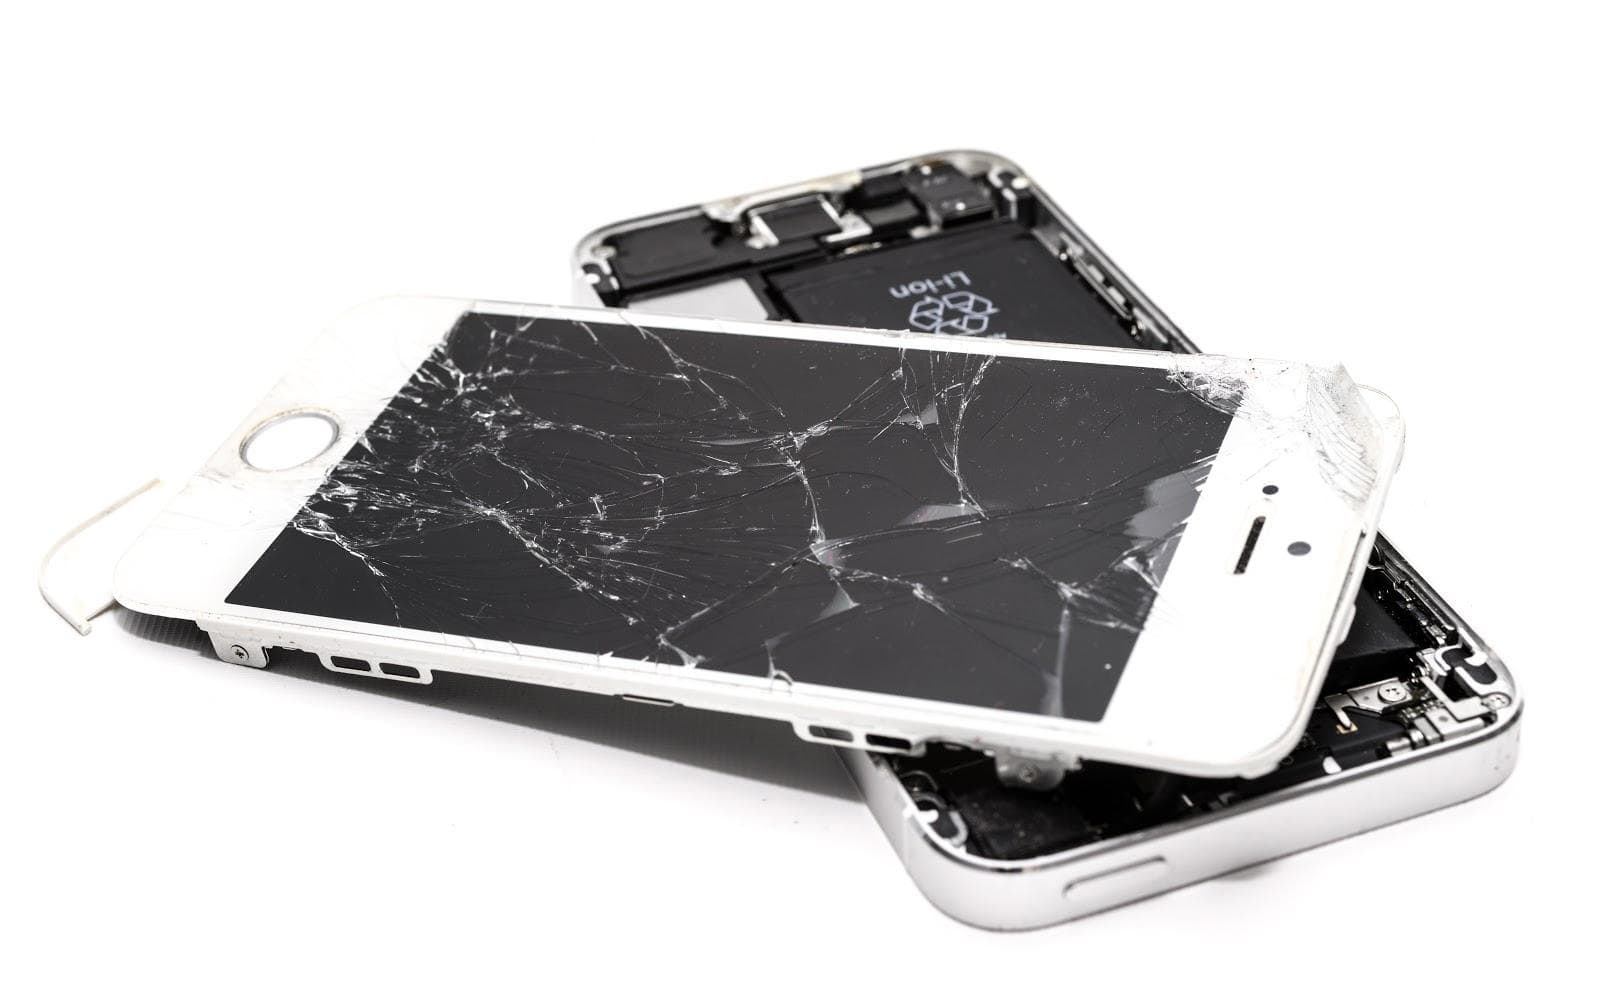 Shattered iphone